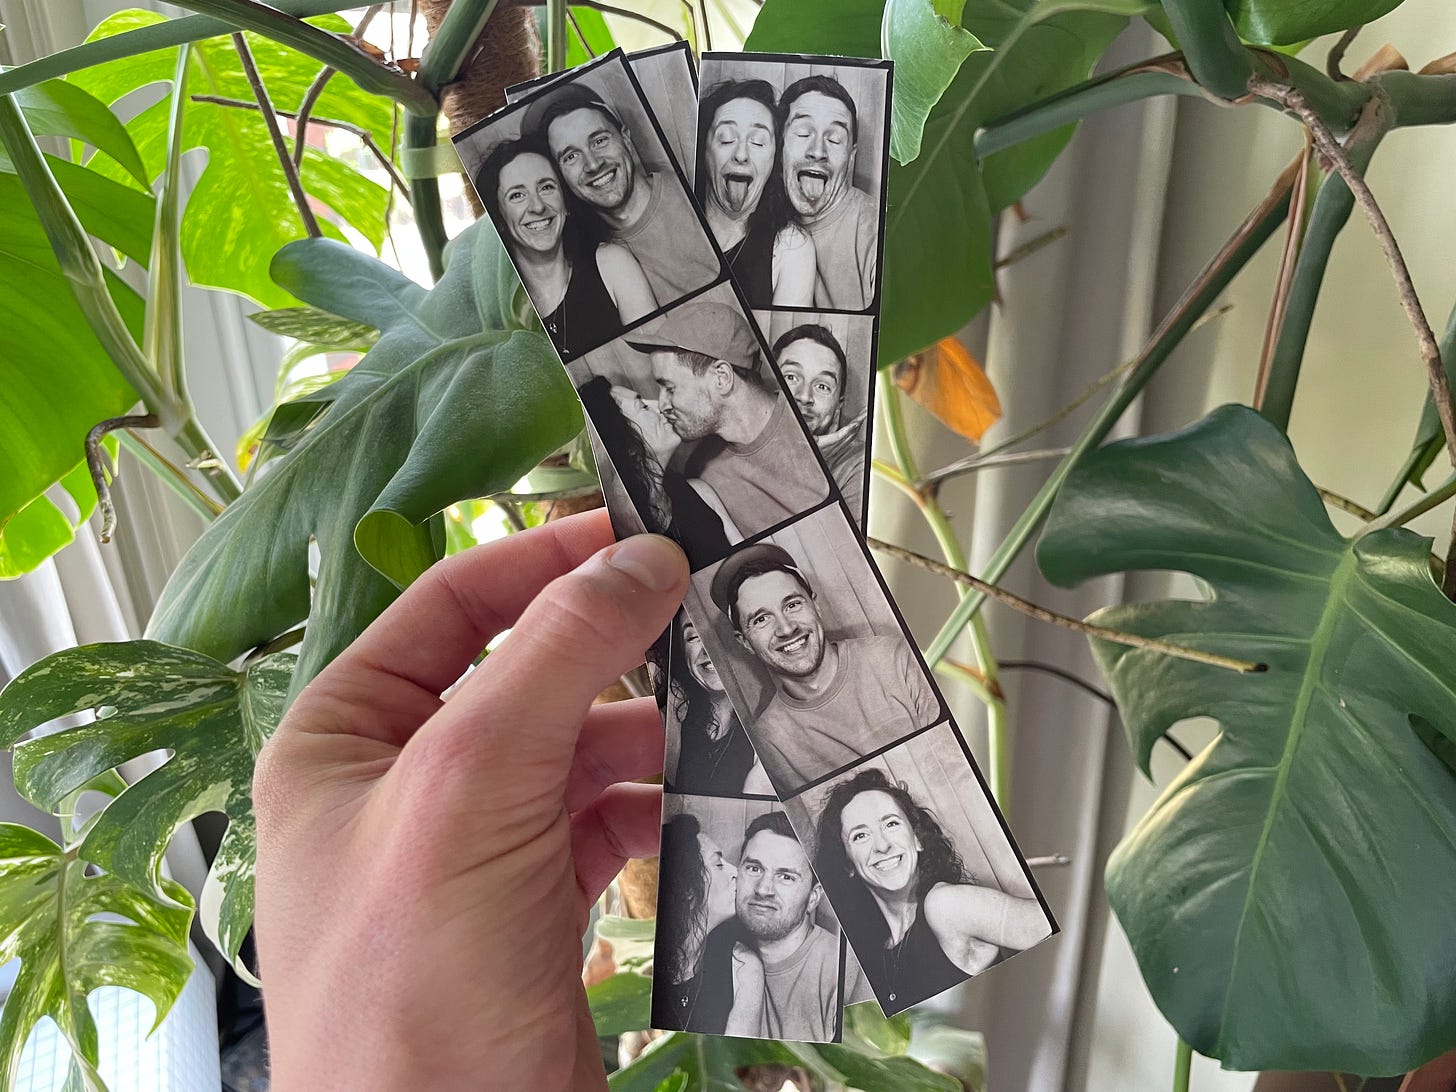 A photo of some photobooth prints of me and my wife, in front of a monstera plant.